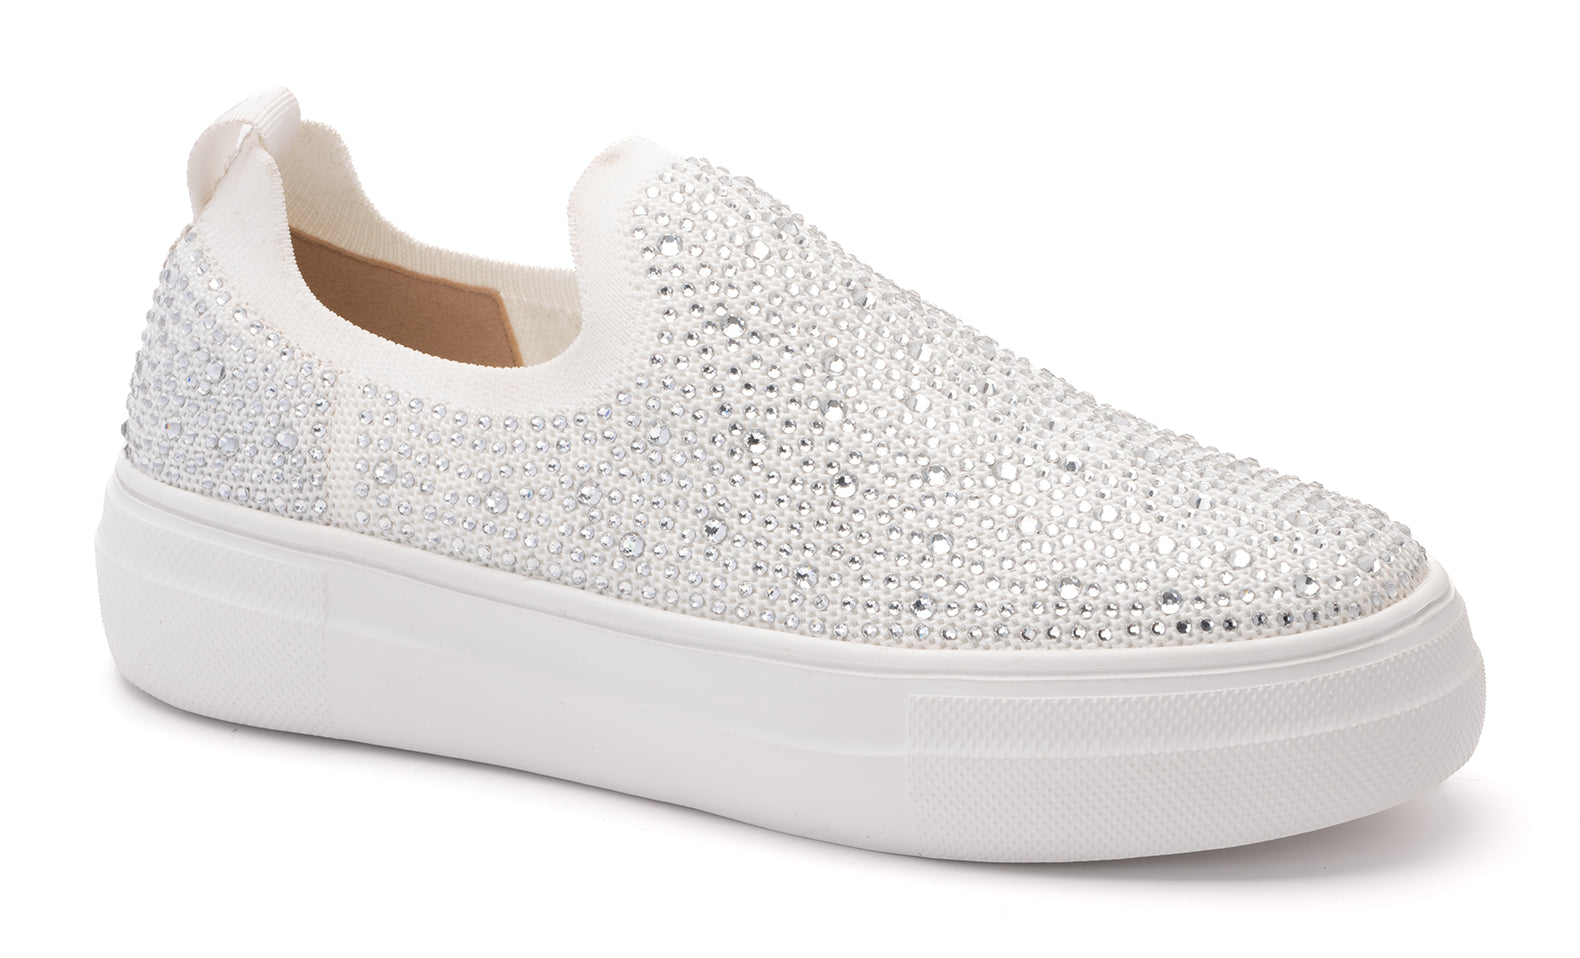 Swank white crystals slide on corky shoes